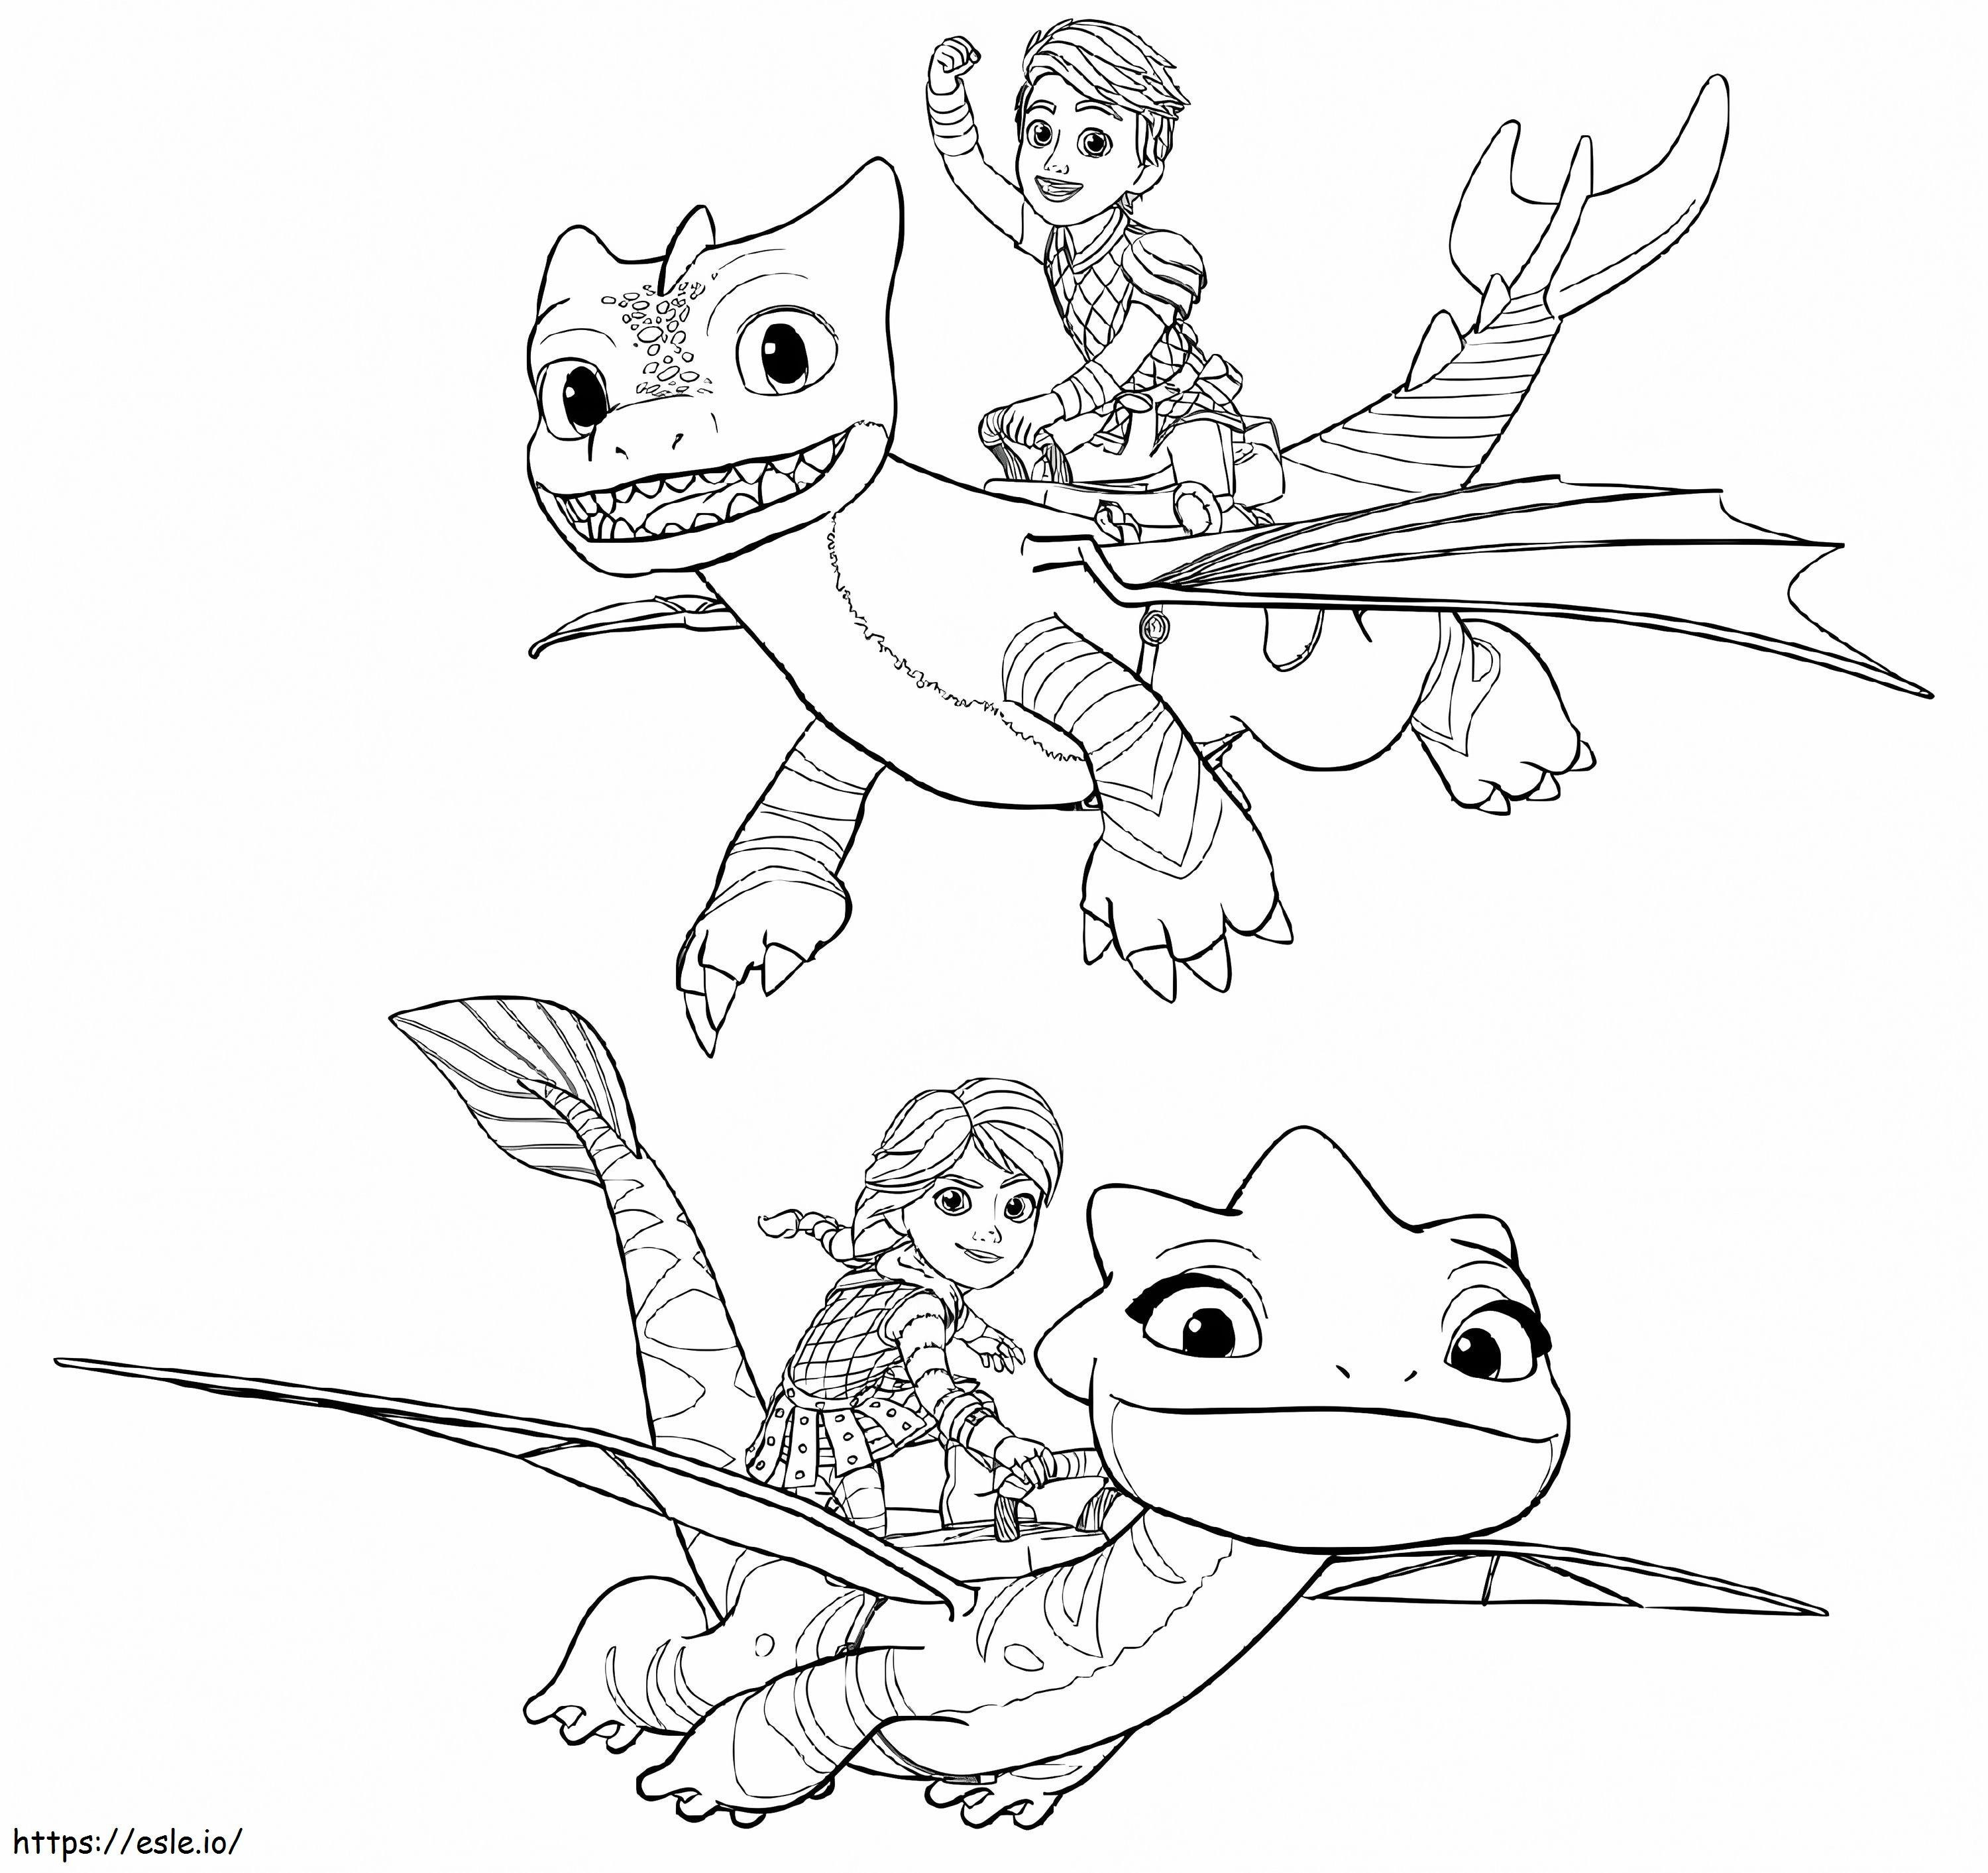 Printable Dragons Rescue Riders coloring page